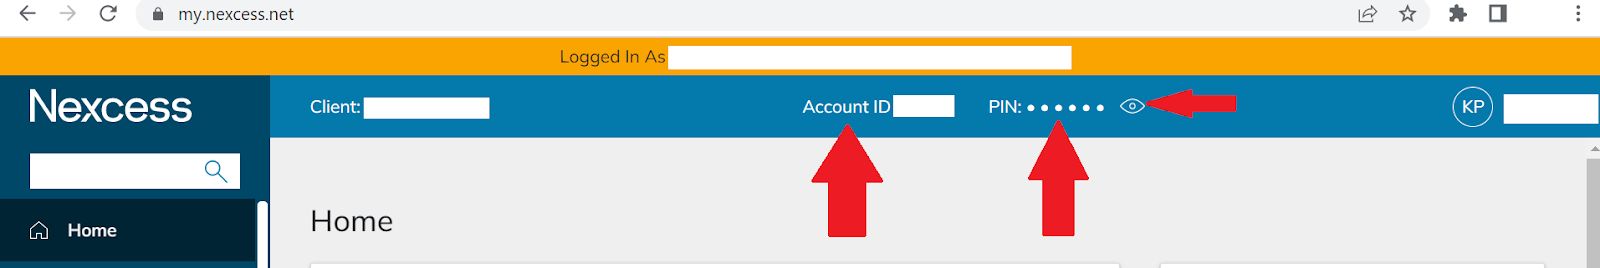 After logging into your Nexcess account, you will be on the Home tab of your Nexcess Client Portal with regard to the list of navigation menu options on the left side of the screen. From there, you will be able to see the required account ID number and the account PIN number, which has six digits. In fact, these credentials remain in view along the top of the screen throughout your session as you move to various areas of the portal.